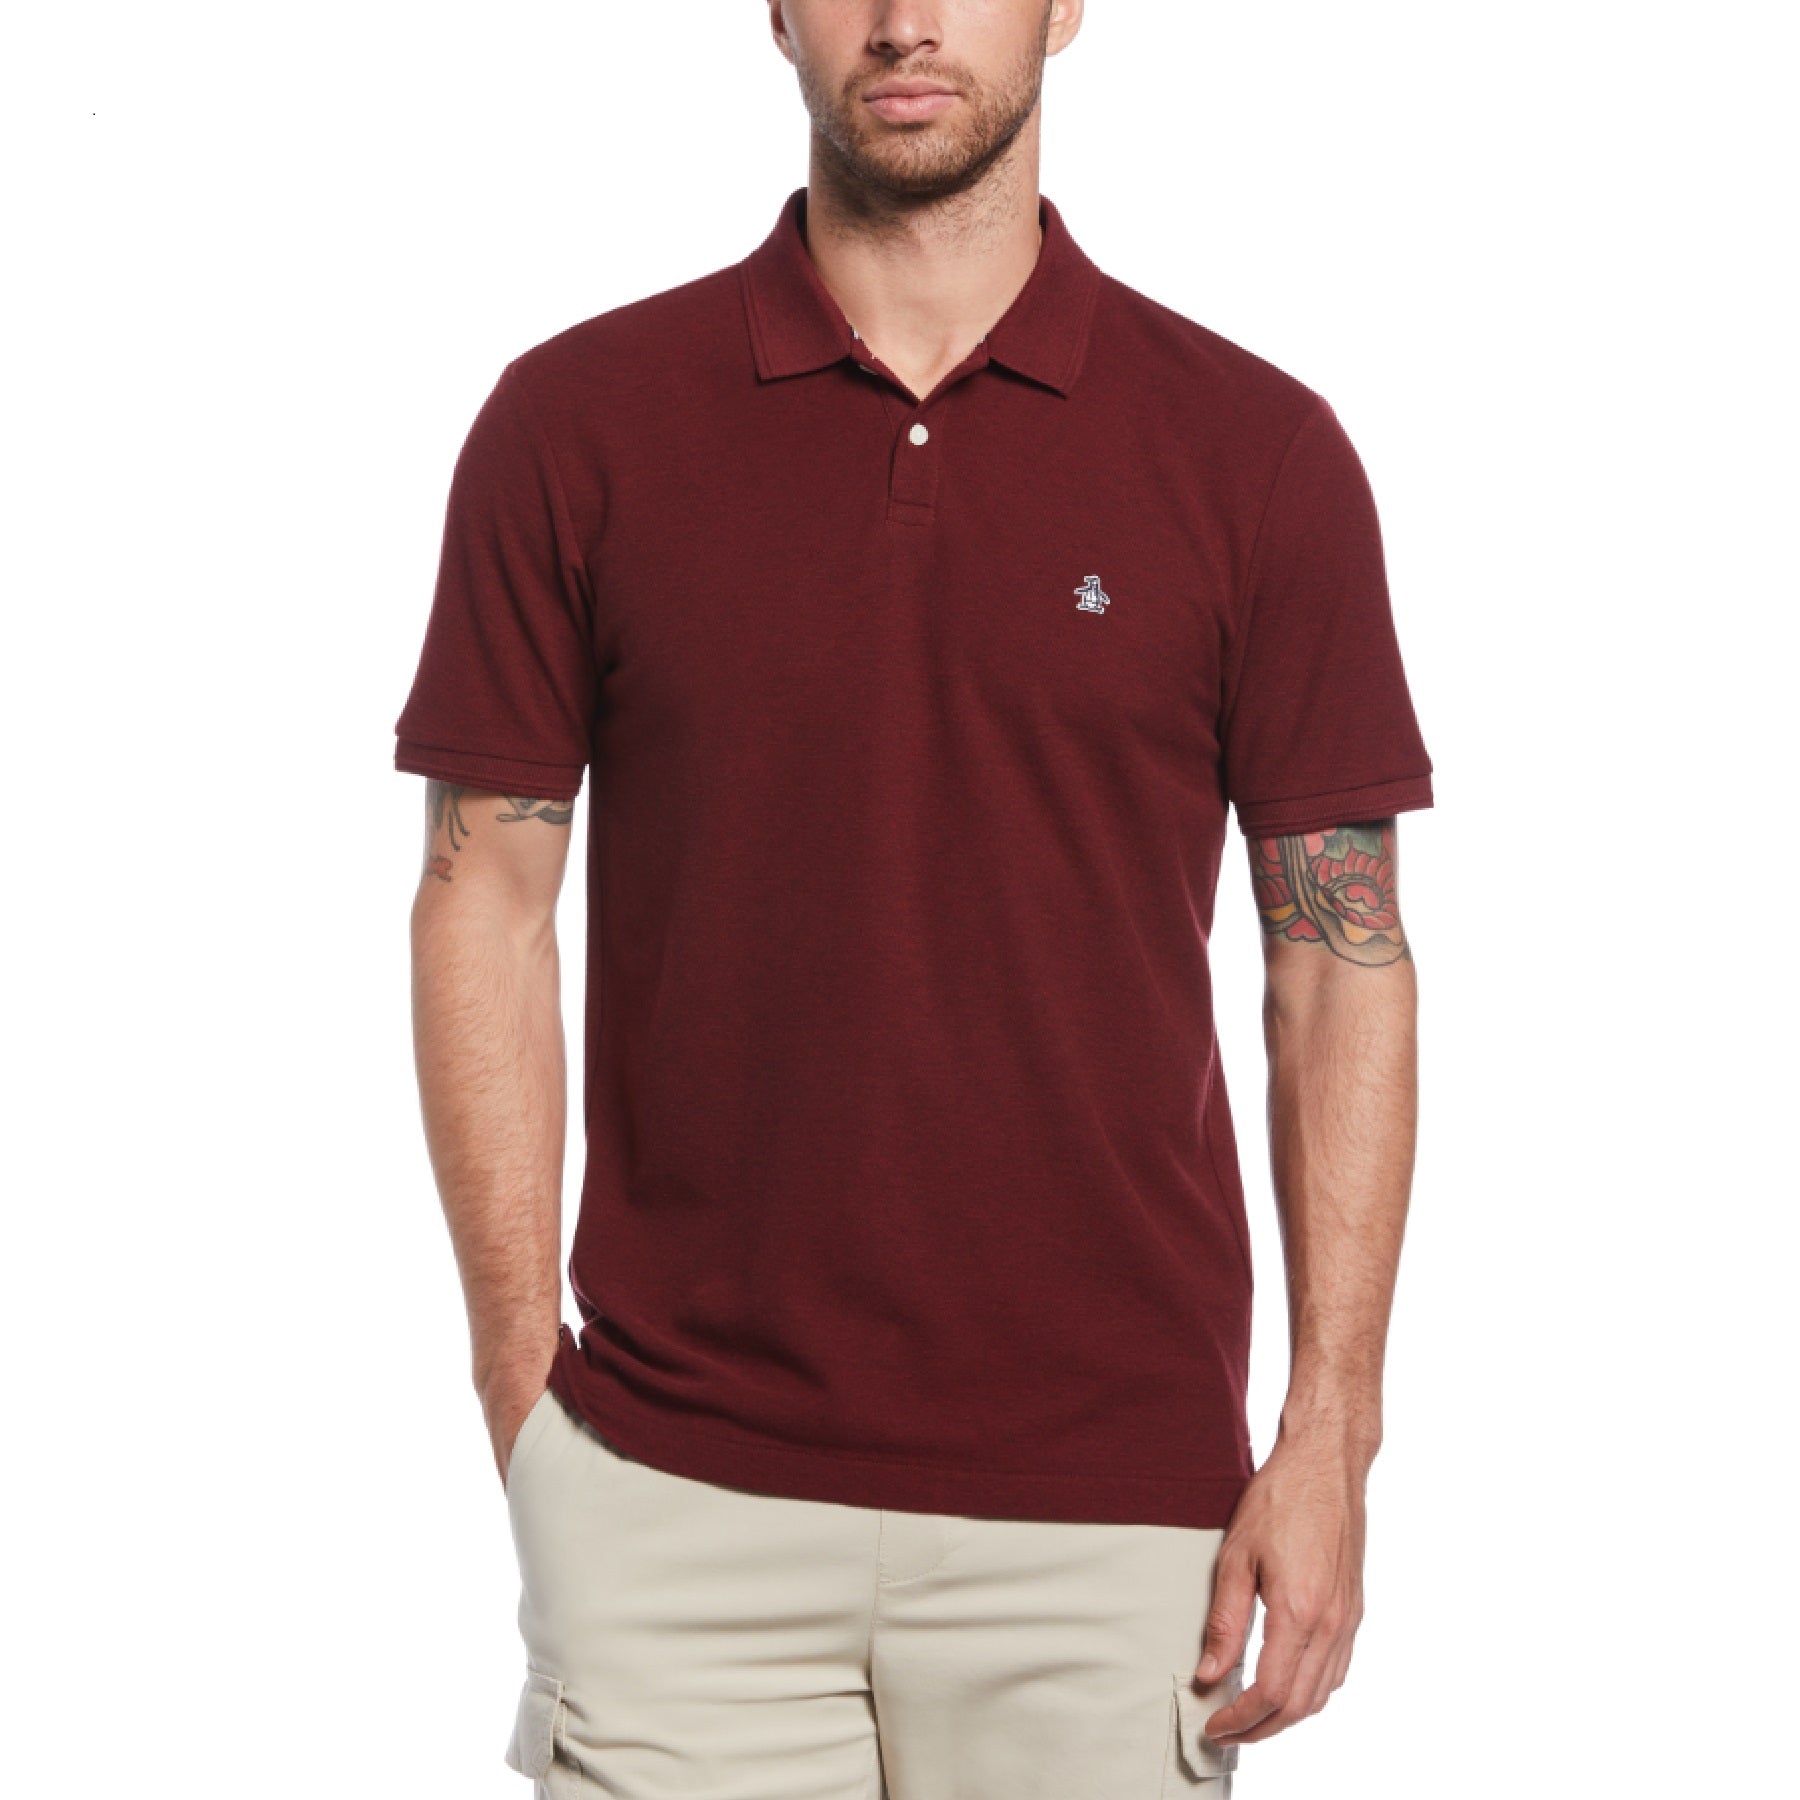 View Daddy Organic Cotton Polo Shirt In Tawny Port information